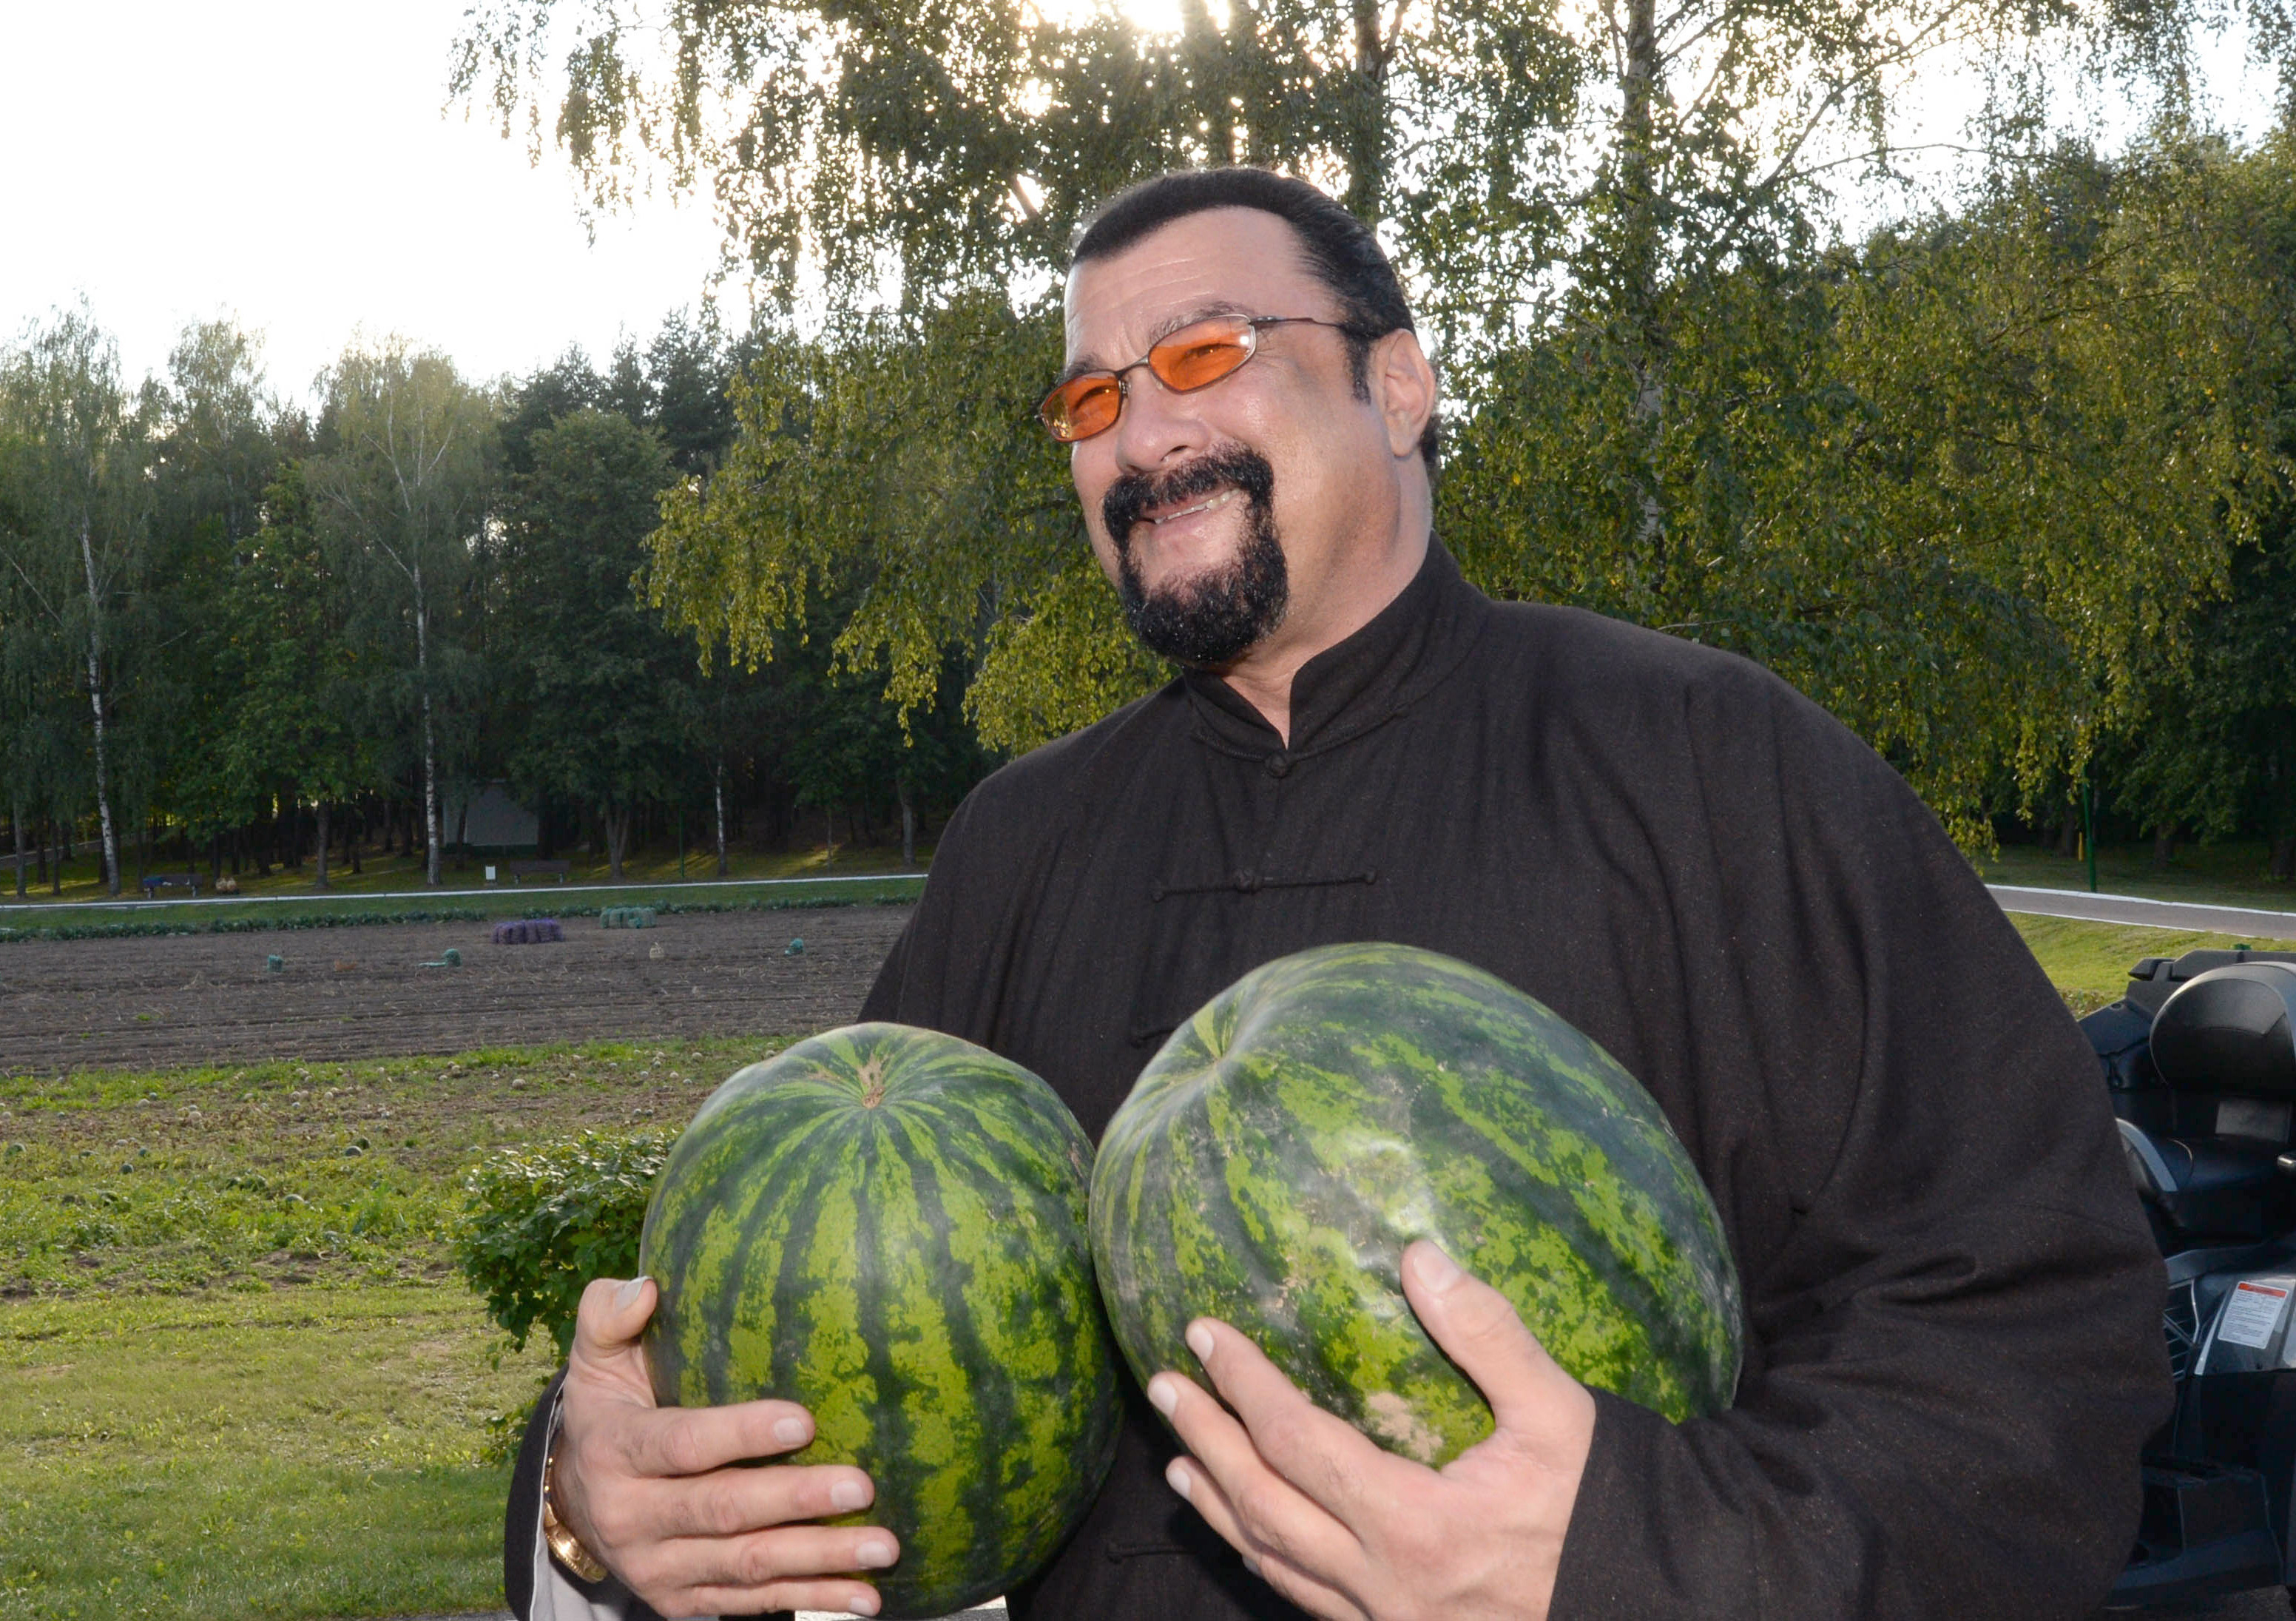 U.S. actor Steven Seagal holds two water melons during his meeting with the Belarus President at his residence on August 24, 2016.